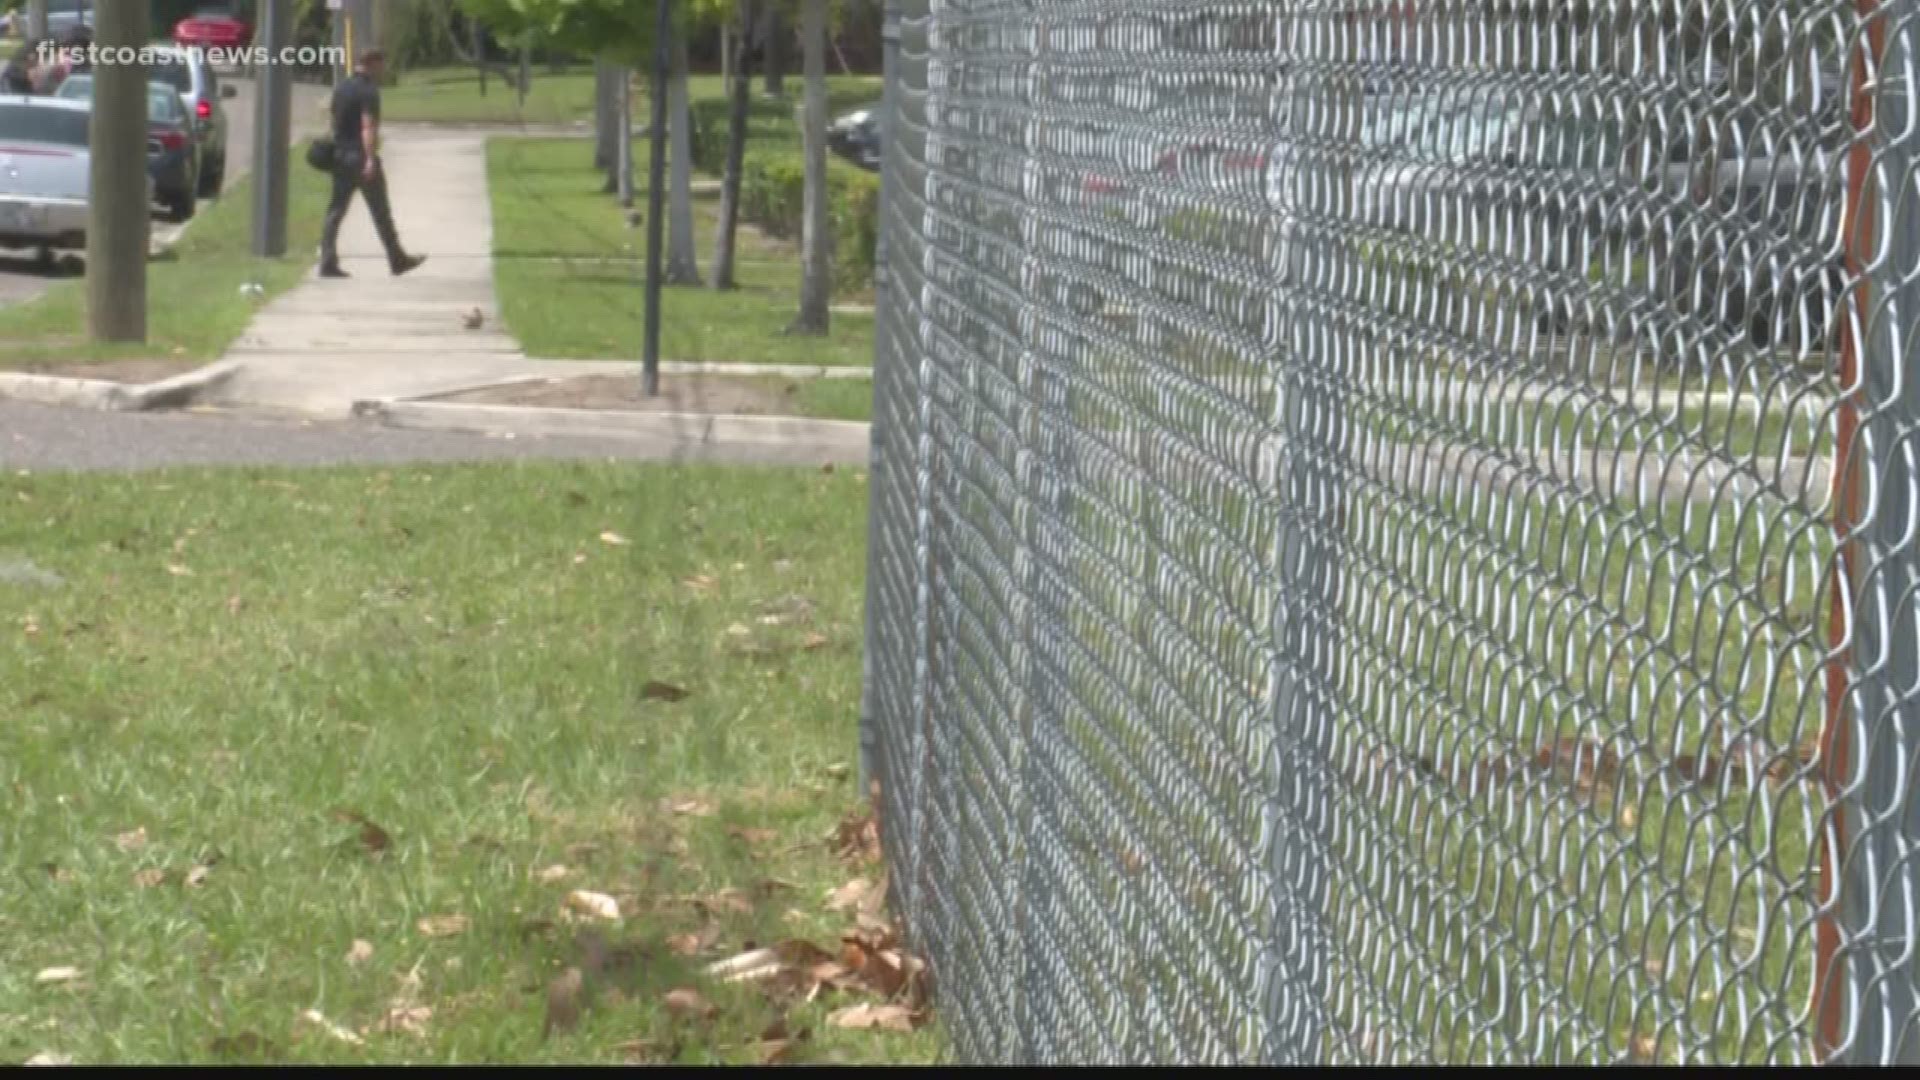 After a JSO officer reportedly pulled his weapon on two teenagers walking home from school, the teen's mother filed a complaint with JSO.